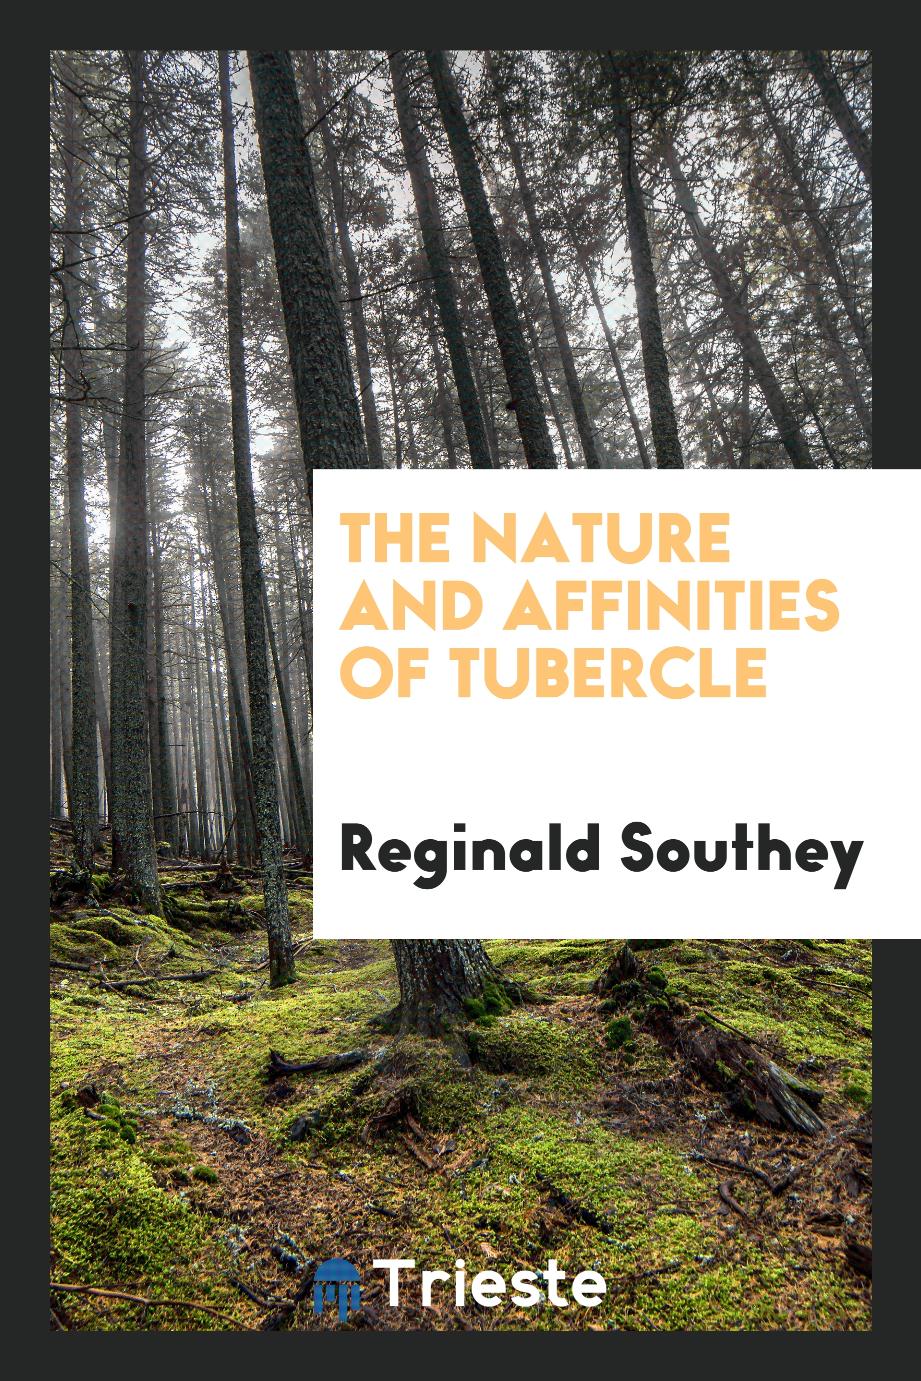 The Nature and Affinities of Tubercle